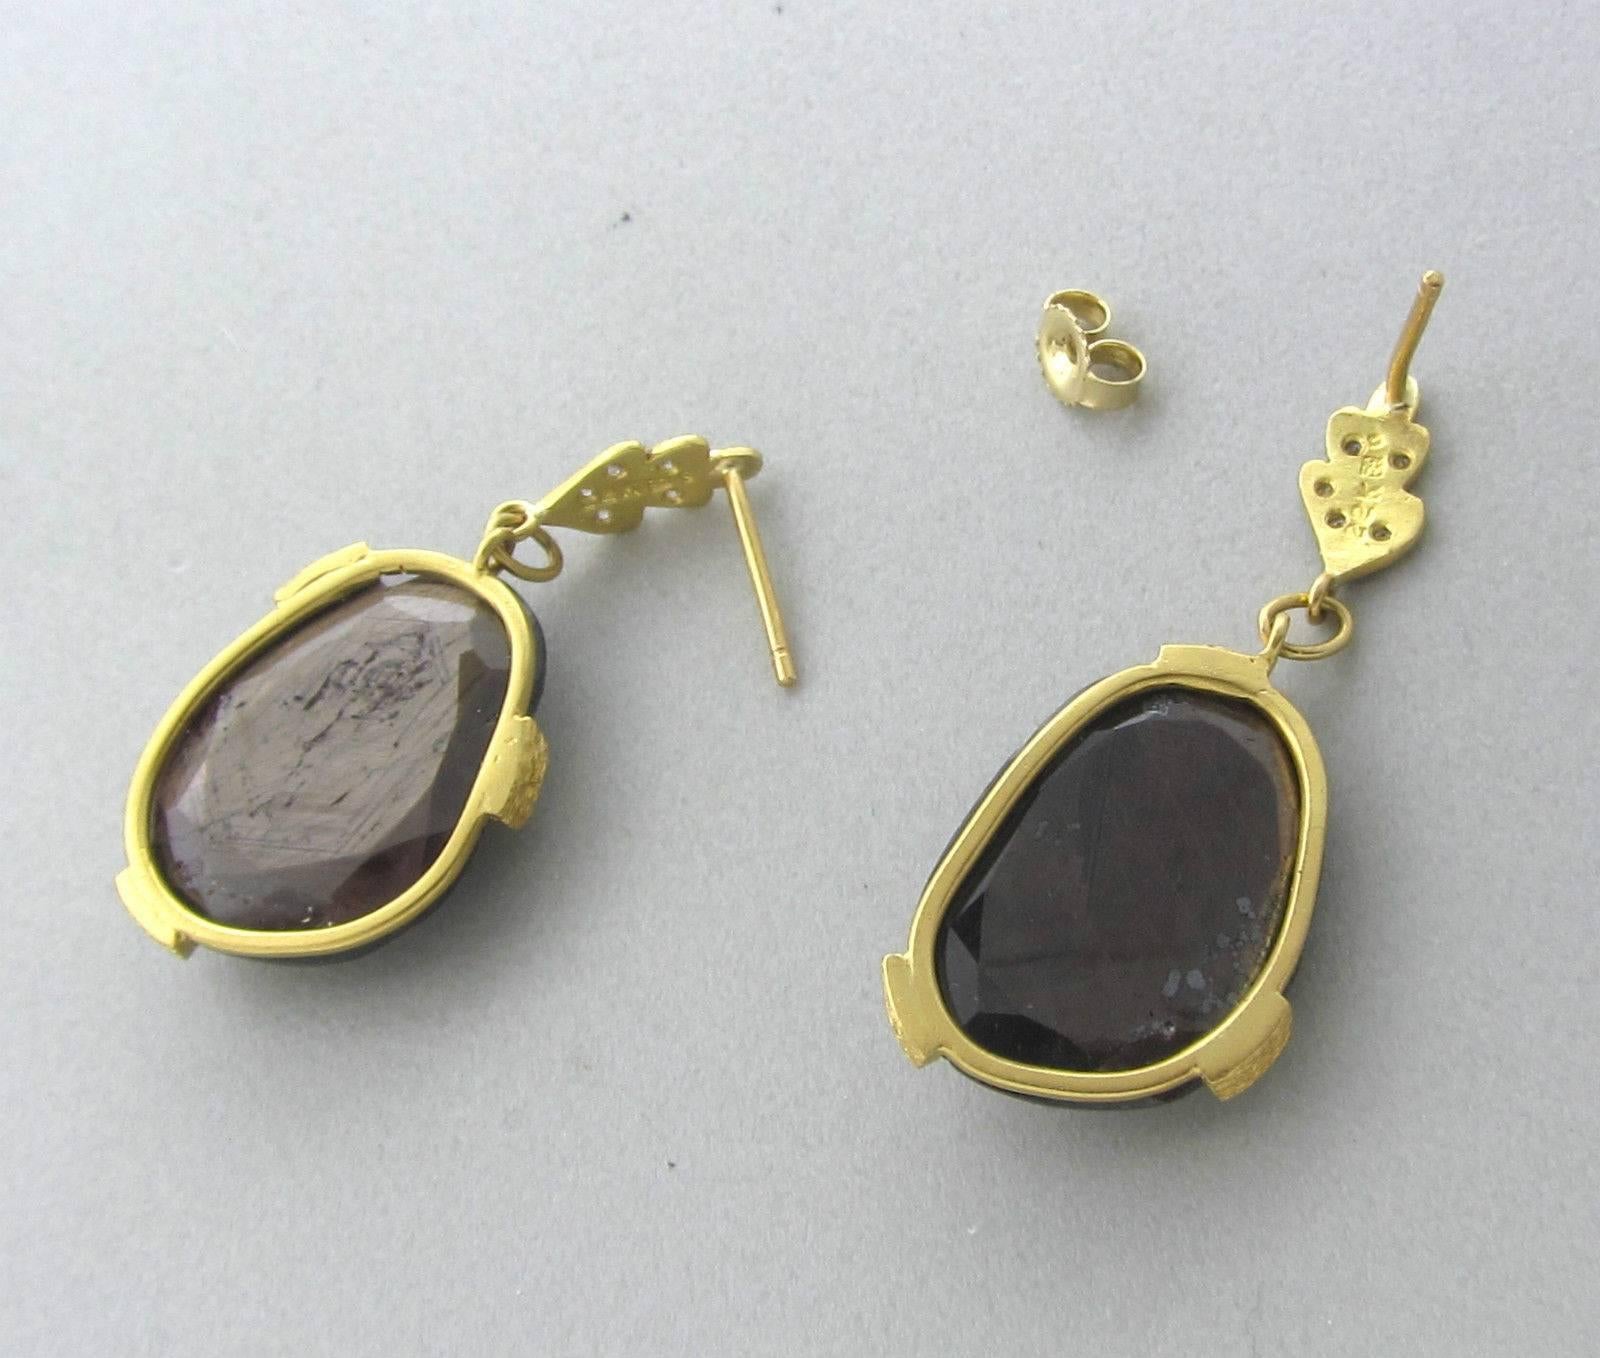 Cathy Waterman drop earrings featuring brown sapphires and decorated with diamonds set in 22K gold. The earrings measure 38mm x 16mm and weigh 9.7g.  One earring is missing a back.